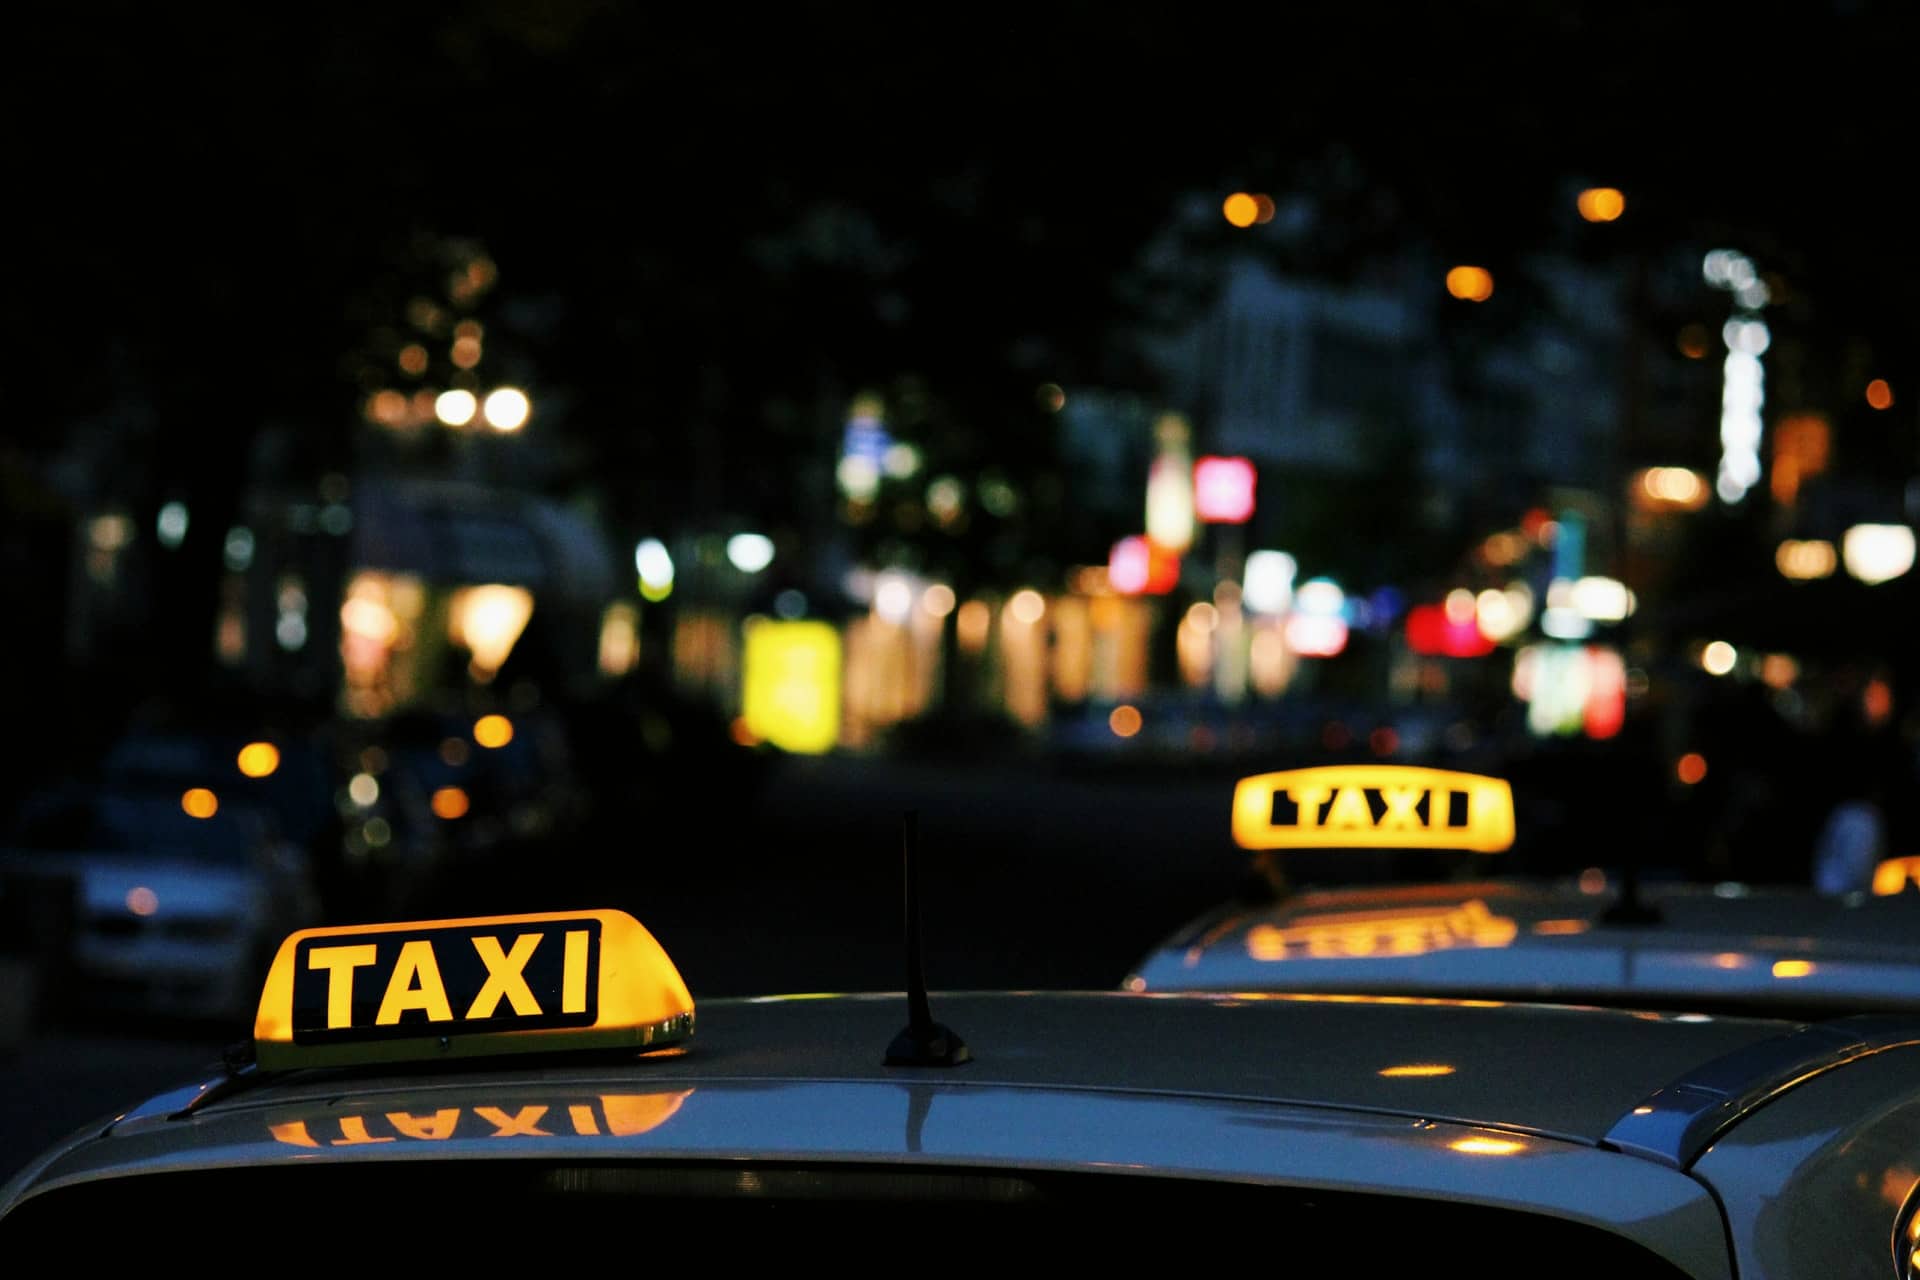 Taxi cabs representing a case determining whether a taxi company's insurance policy qualified as motor vehicle accident coverage for statutory accident benefits